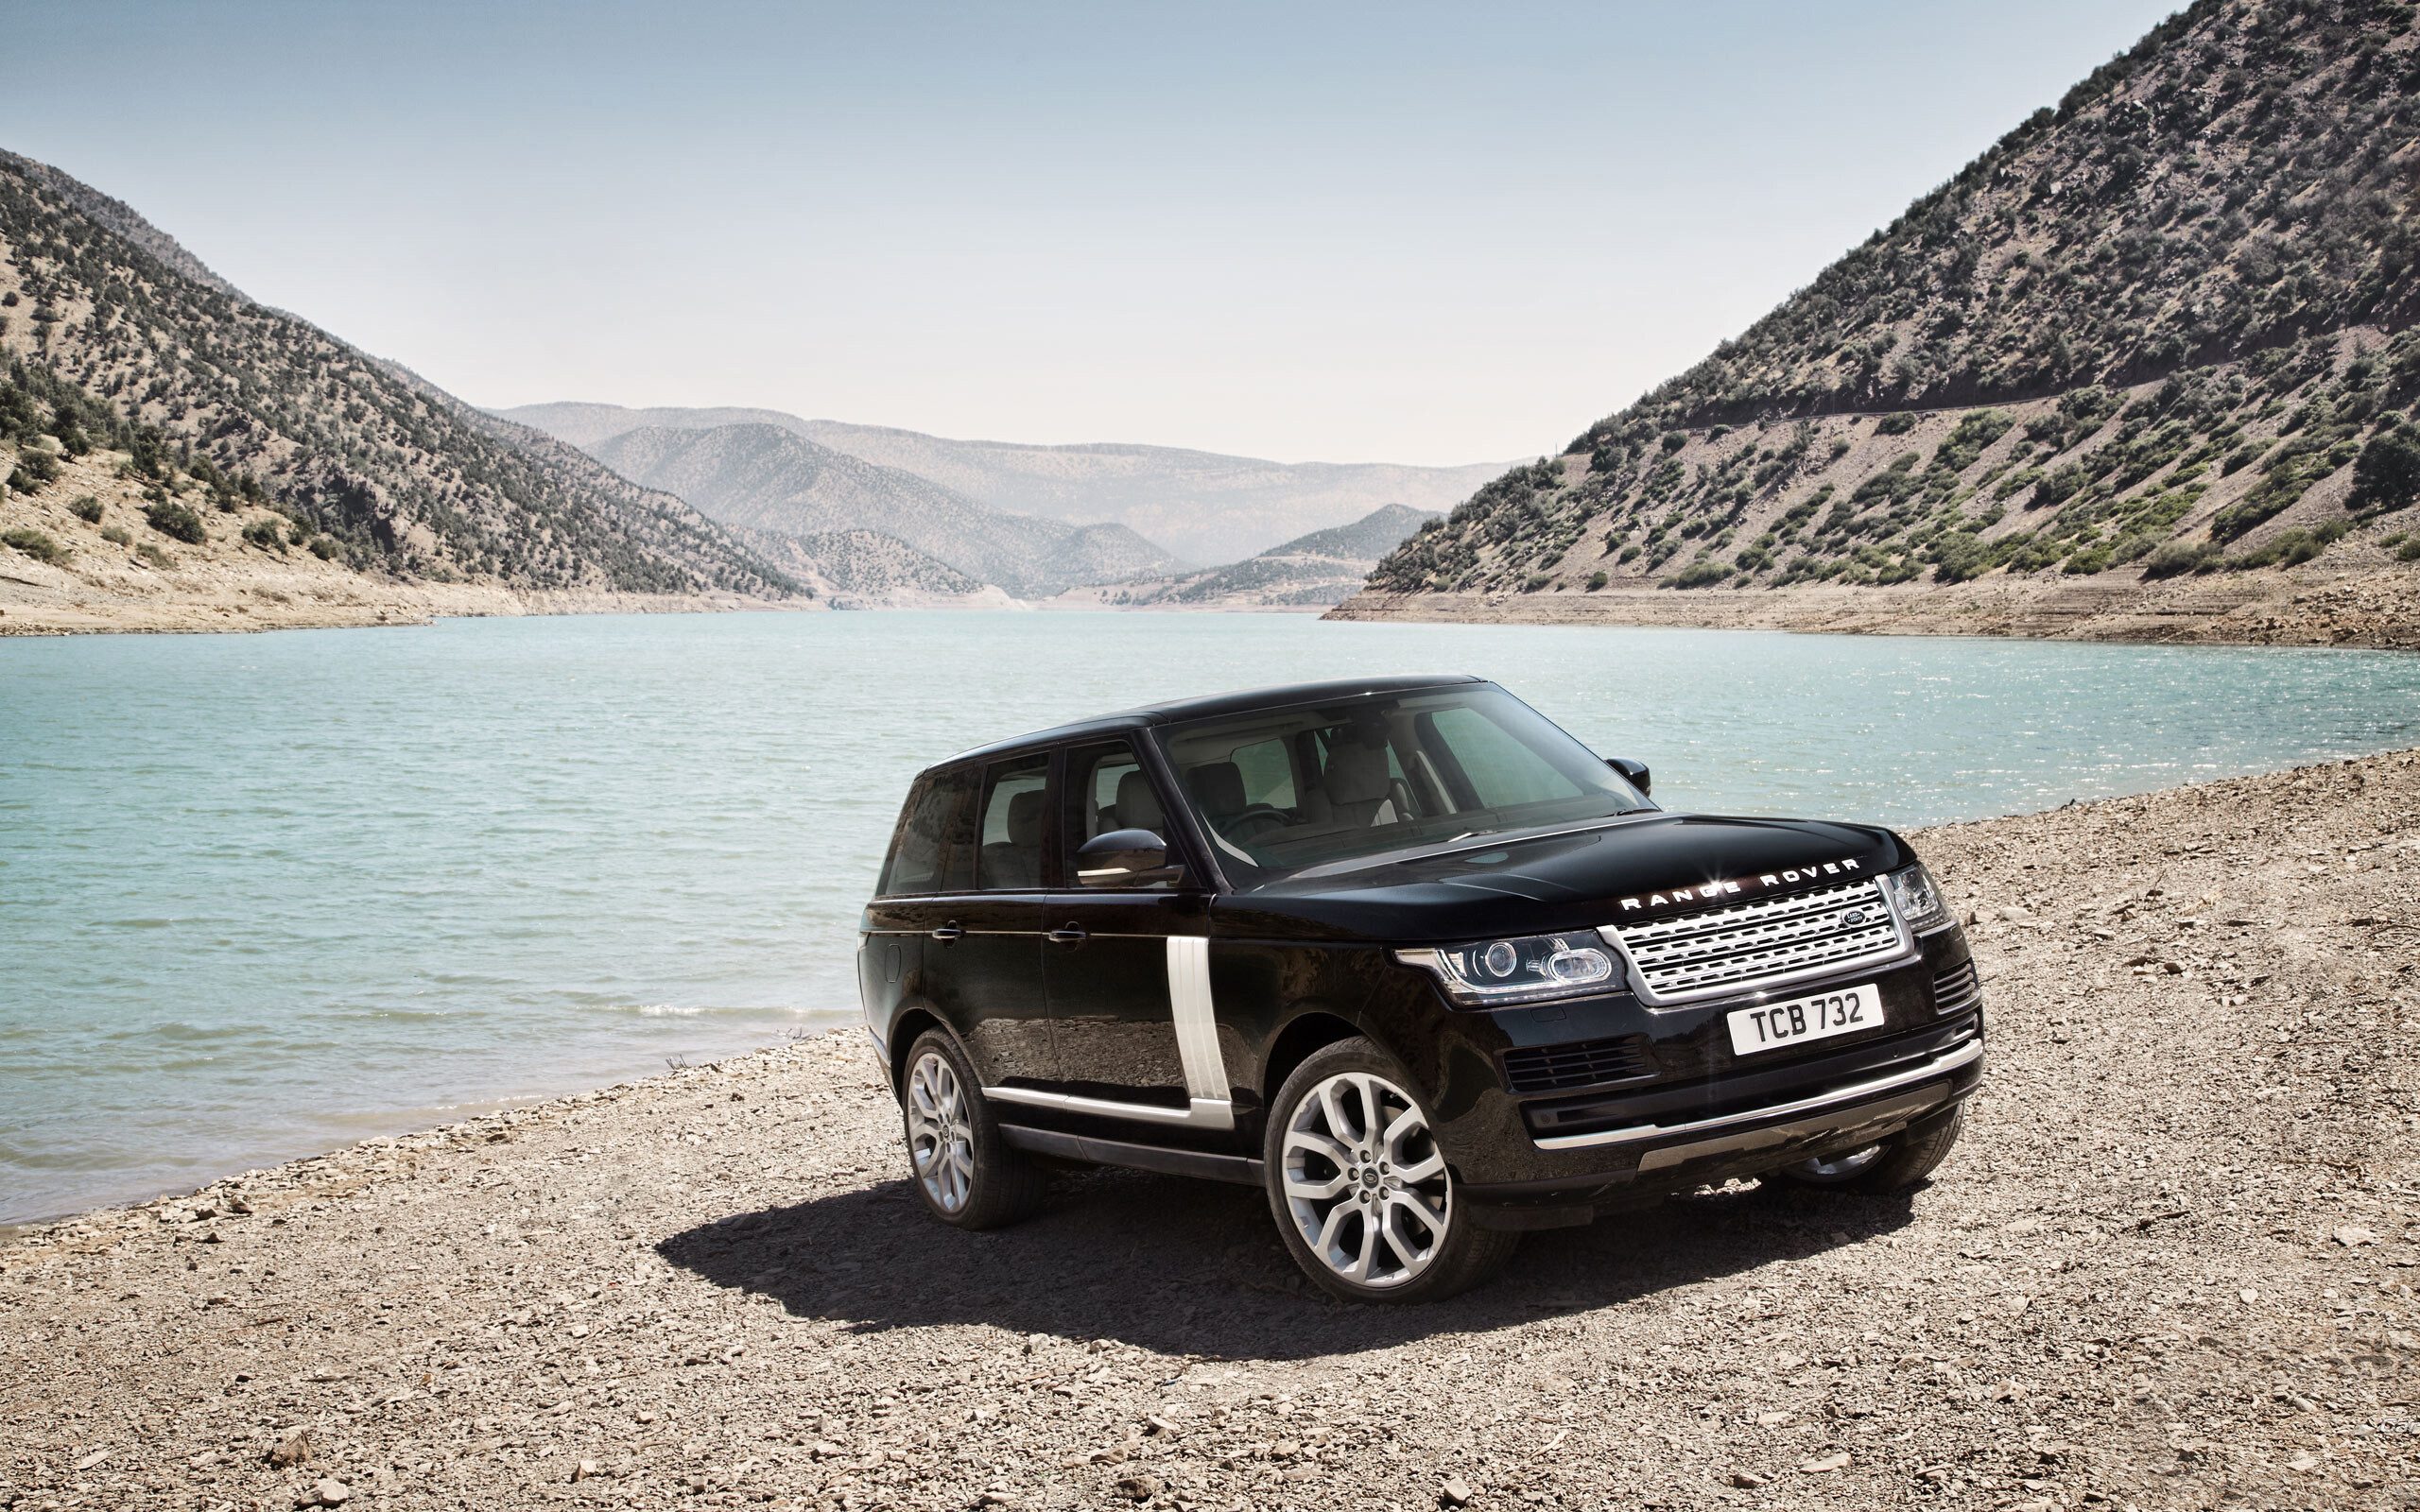 Range Rover: The first-generation of the cars was produced between 1969 and 1996. 2560x1600 HD Wallpaper.